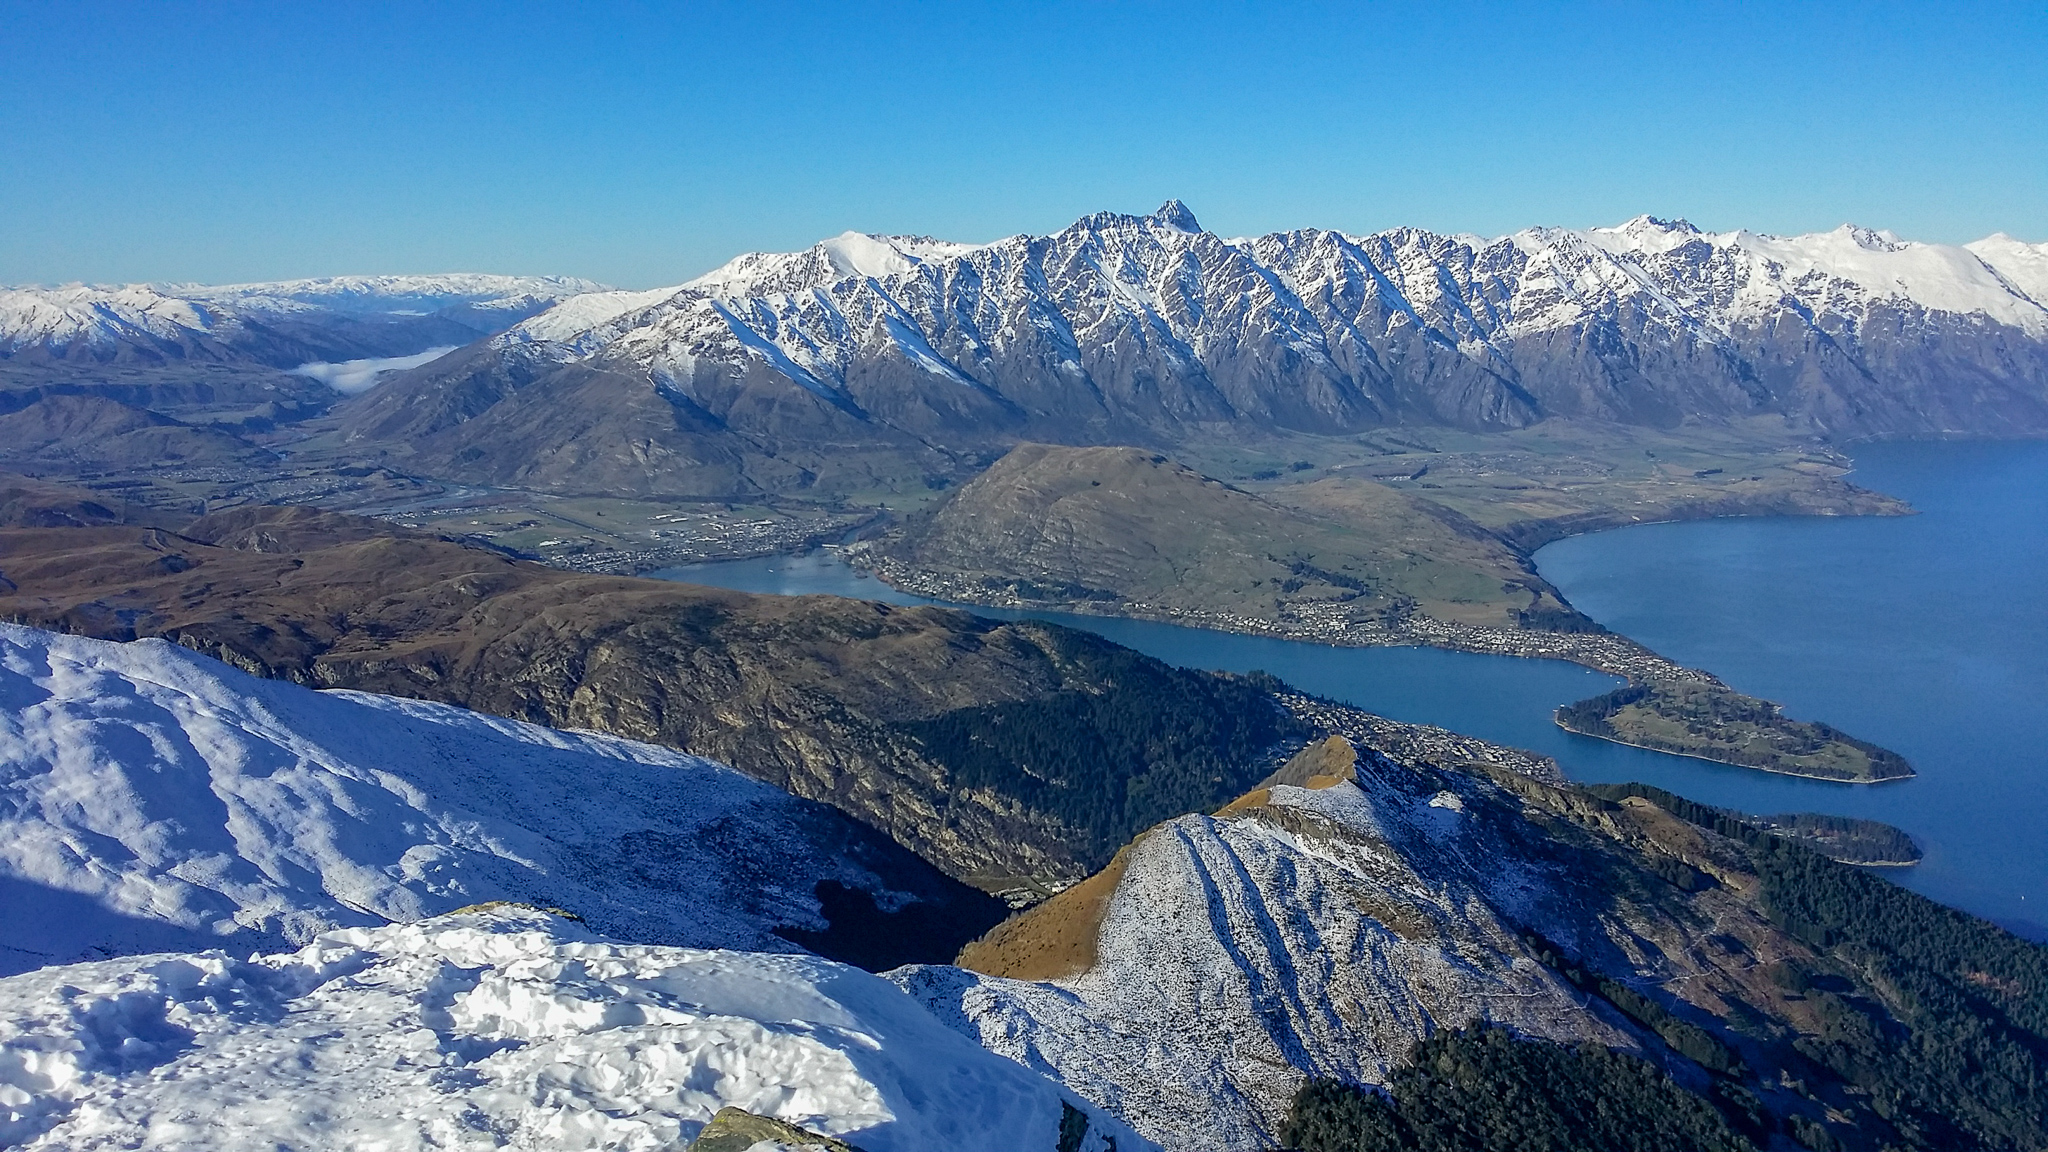 Photo from the summit of Ben Lomond summit in winter with the Remarkables and Lake Wakatipu in the background